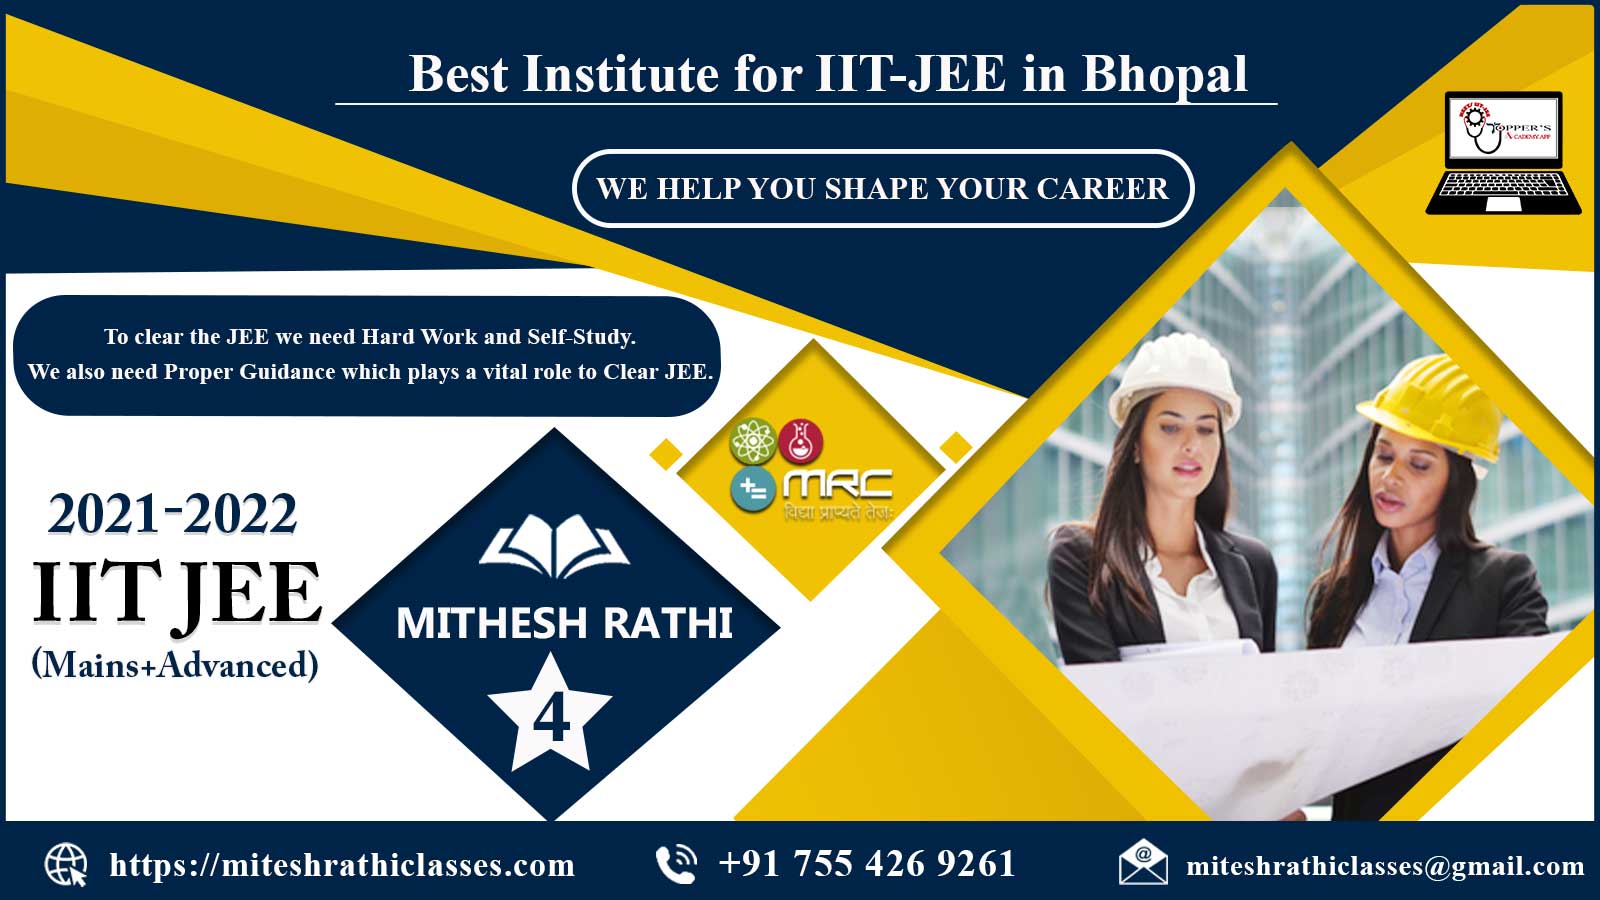 Mithesh Rathi IIT JEE Classes in Bhopal